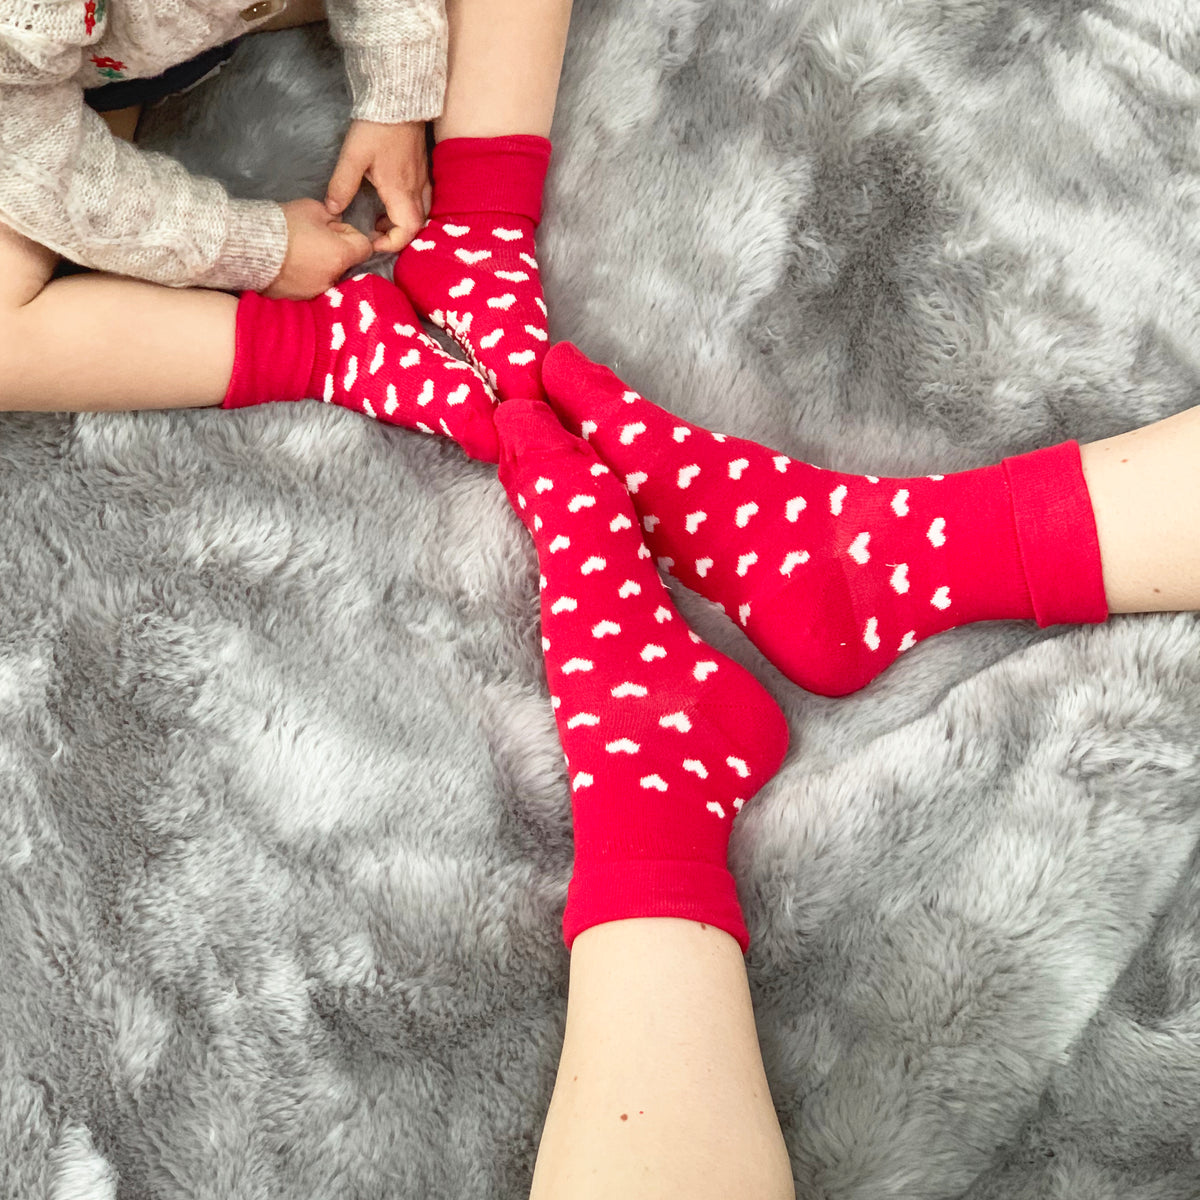 Mini Me Matching Adult and Child Socks Set in Red Hearts - The Perfect Birthday or Christmas Gift ♥️